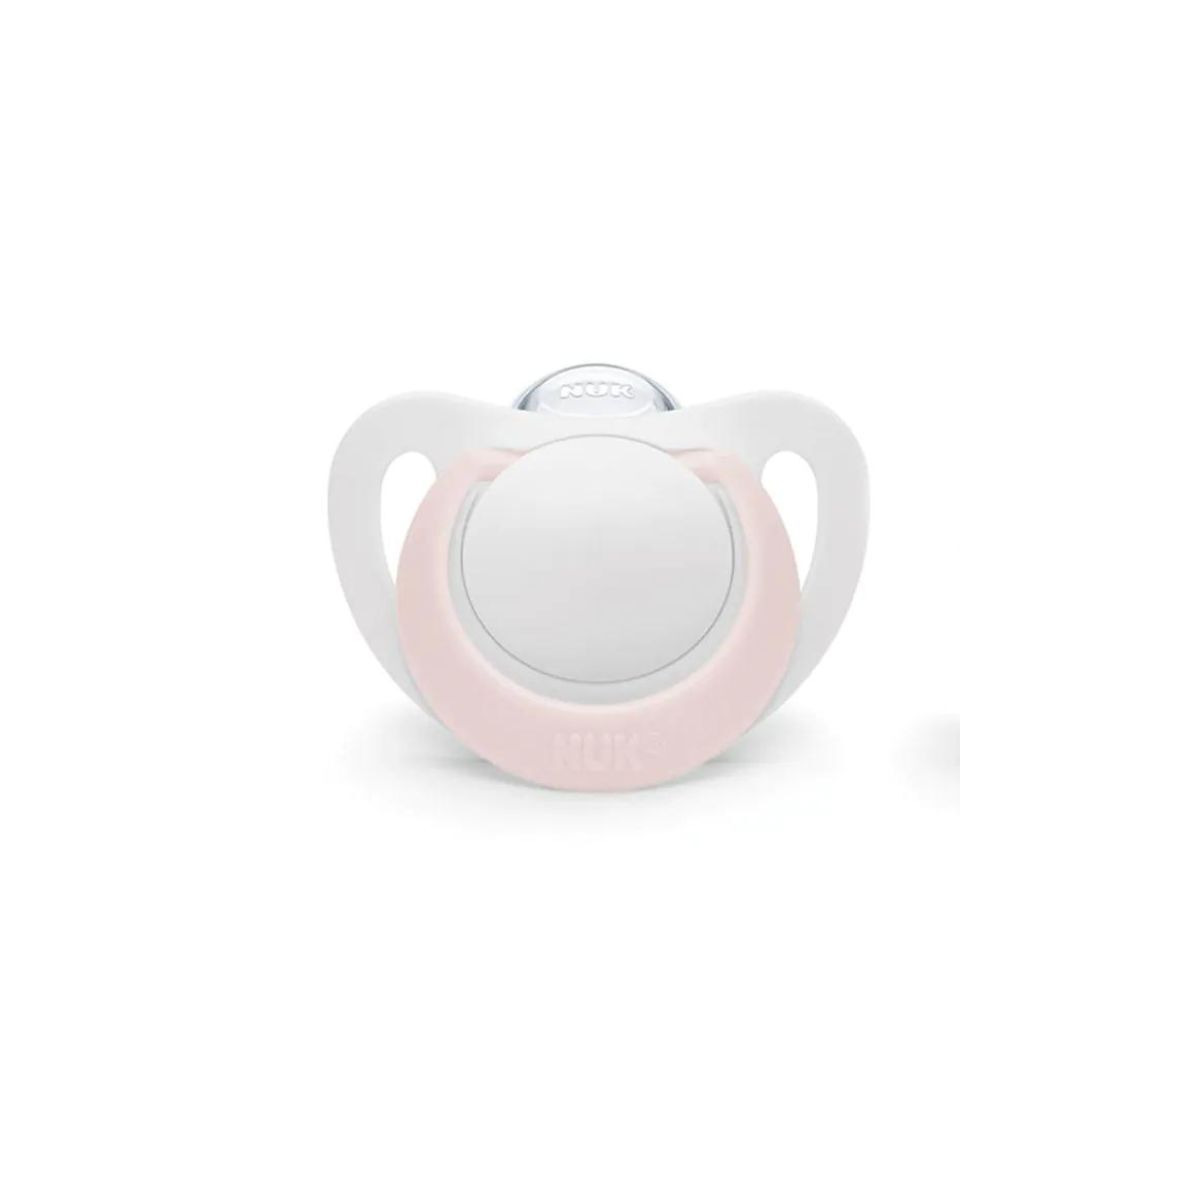 NUK Silicone Star Soother